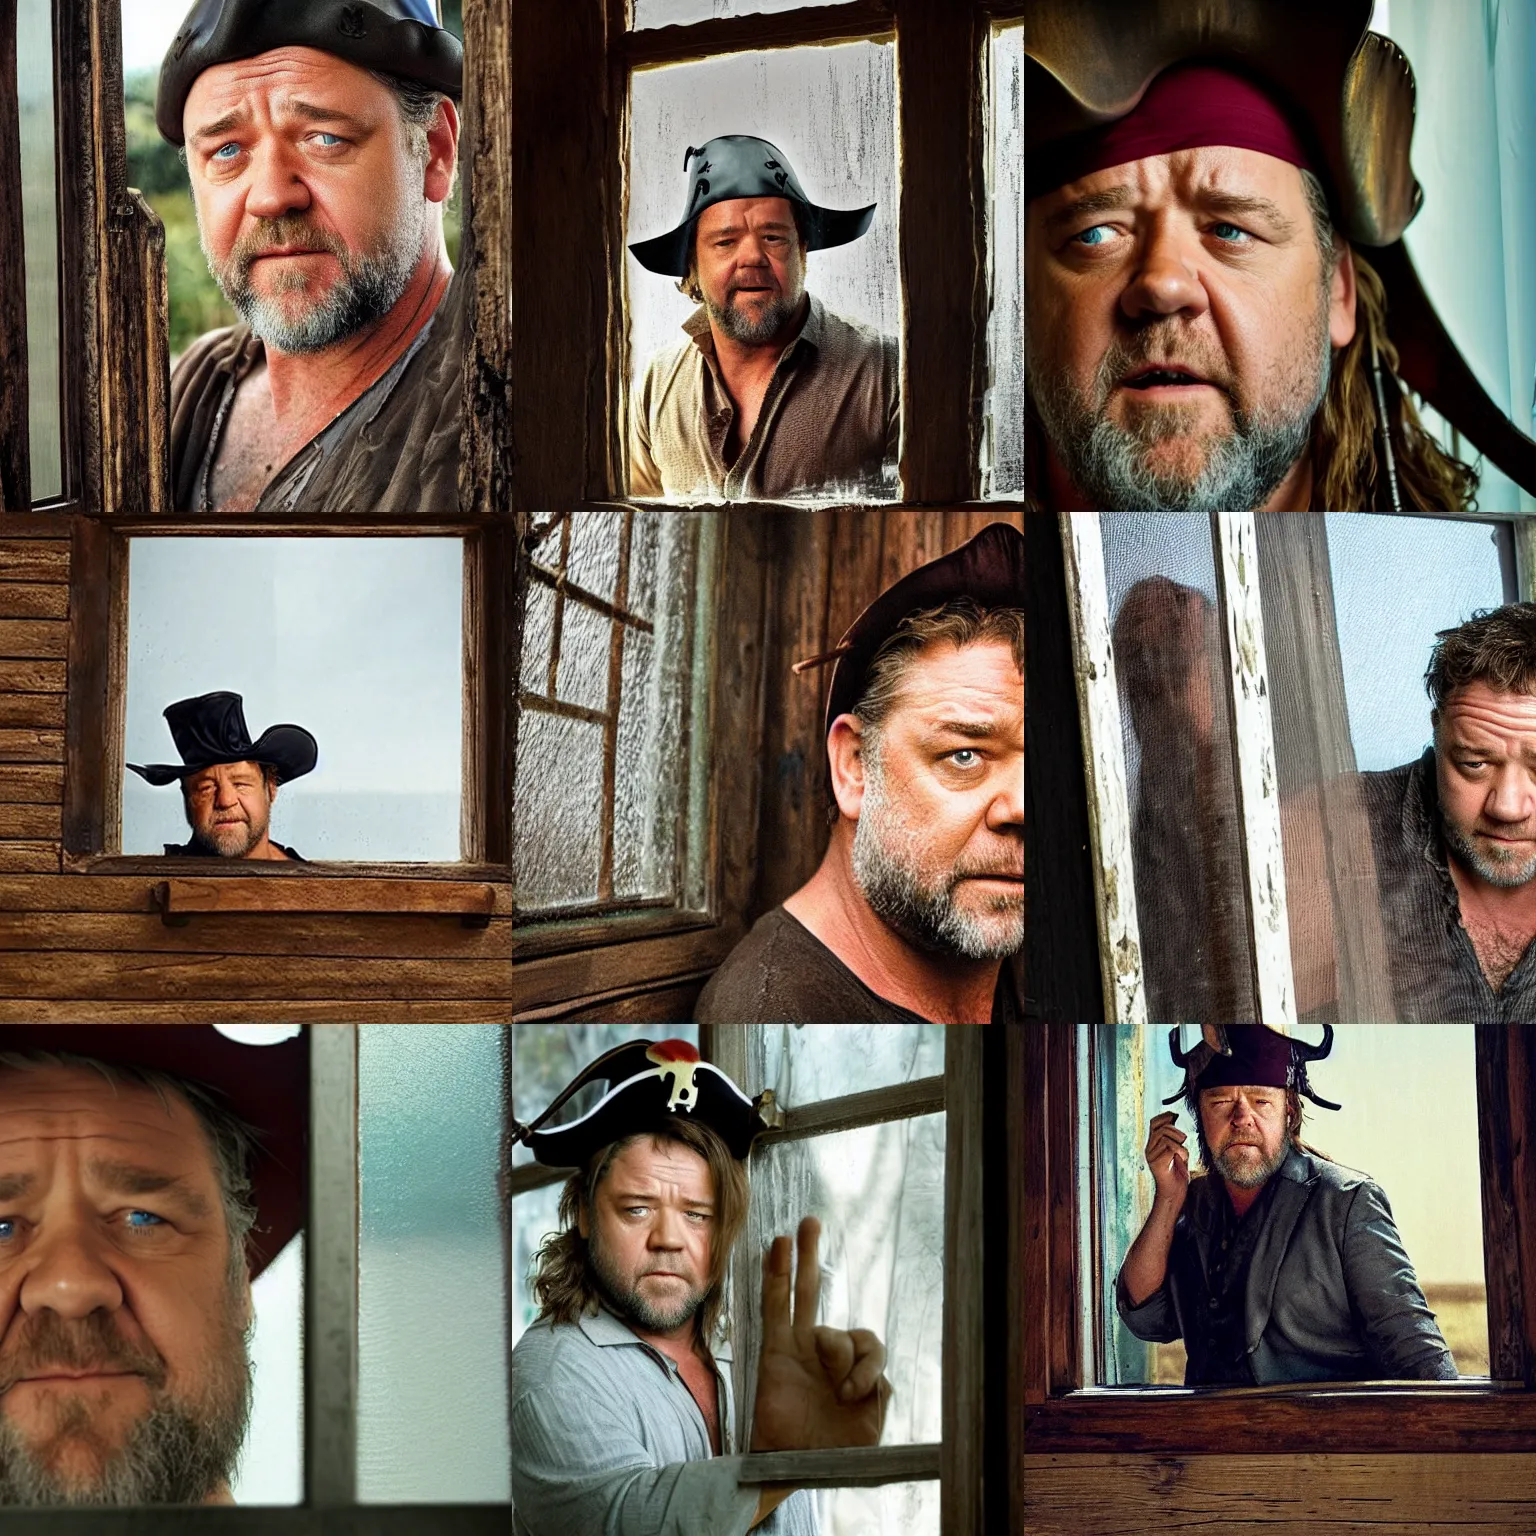 Prompt: russell crowe wearing a too wide silly pirate hat behind a dirty window and wooden wall staring out